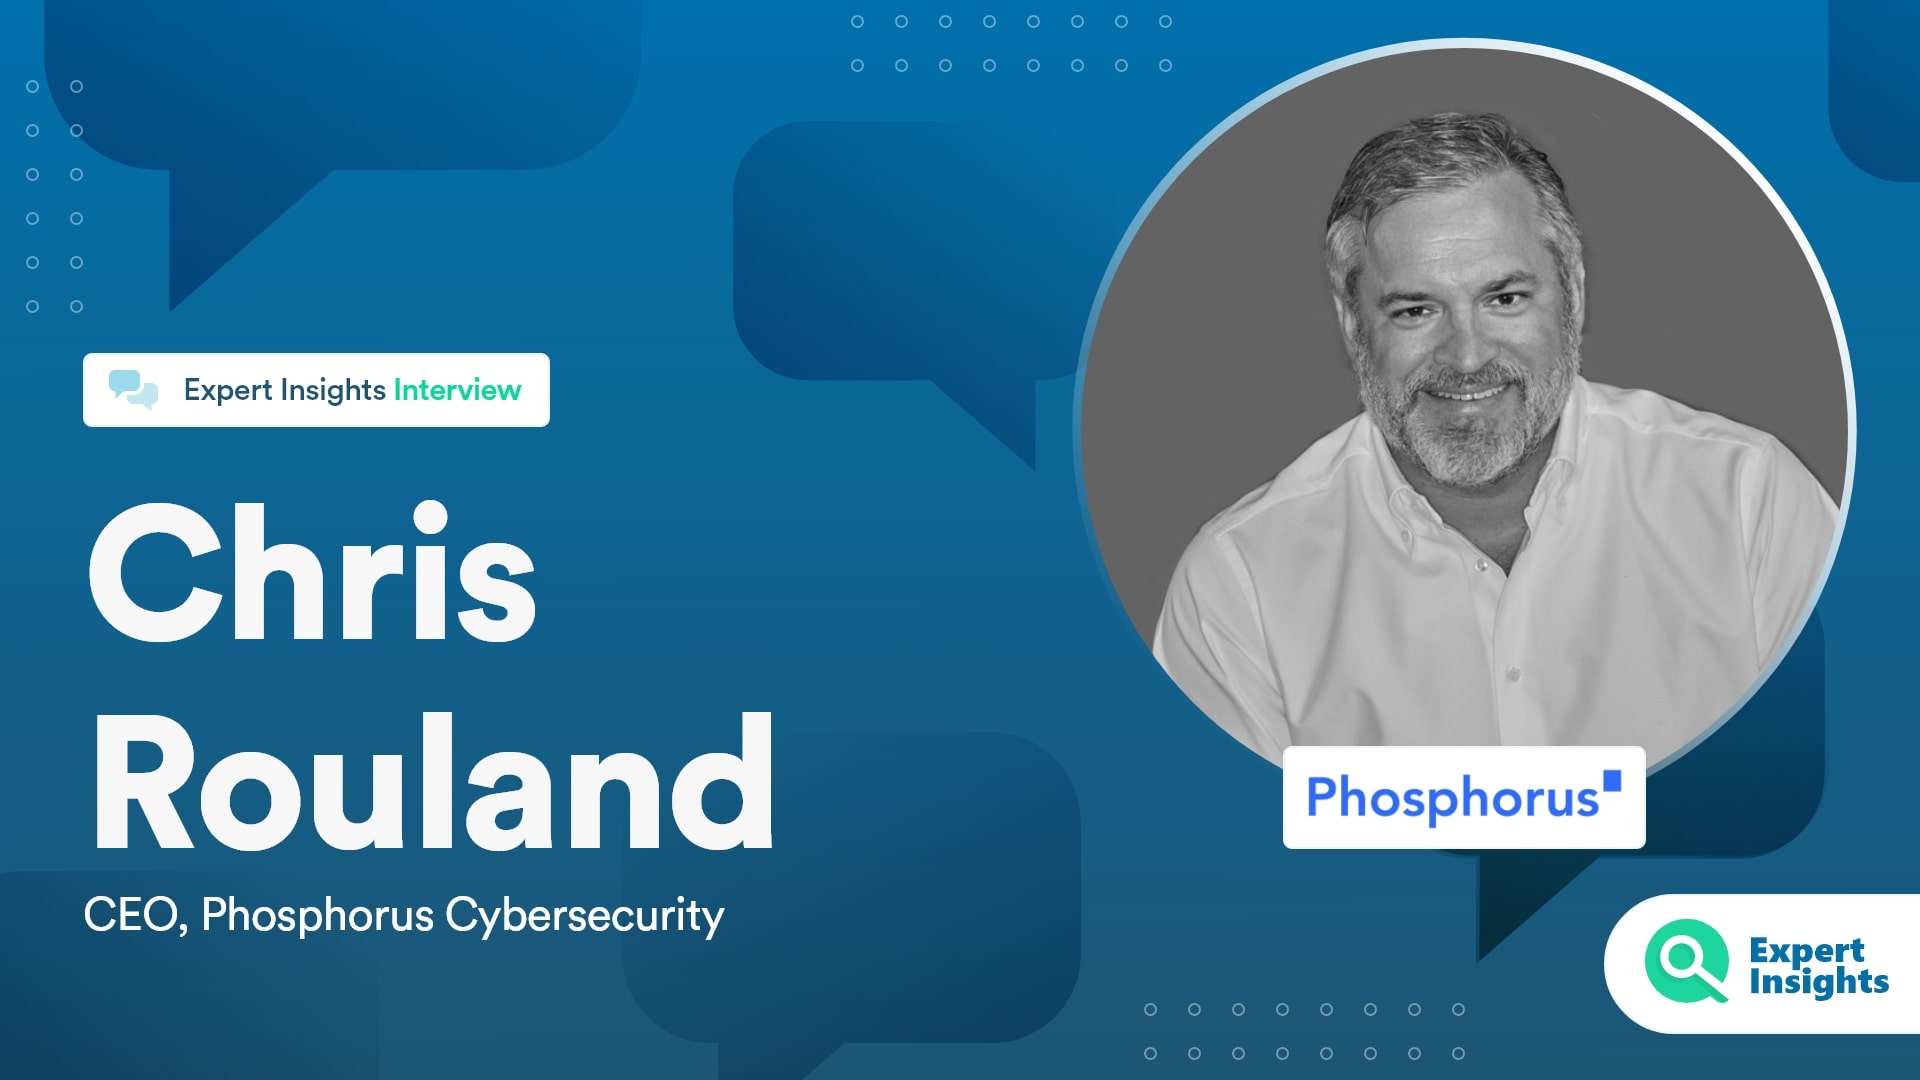 Expert Insights Interview With Chris Rouland Of Phosphorus Cybersecurity